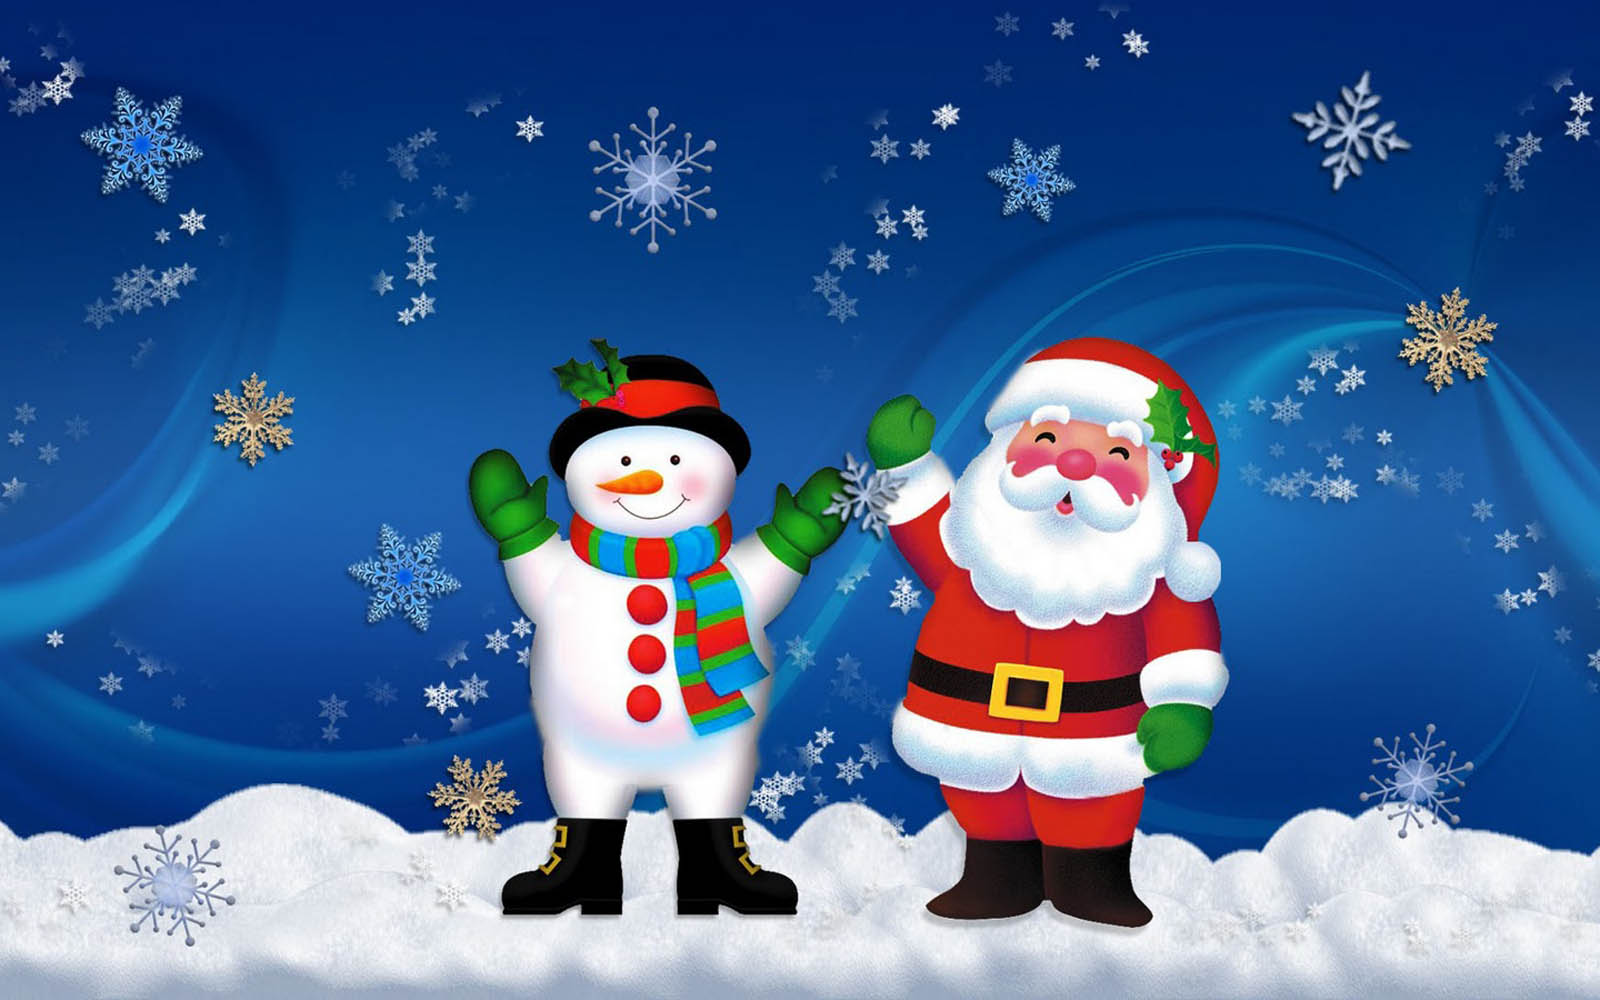 Tag Snowman Background Wallpaper Paos Pictures And Image For